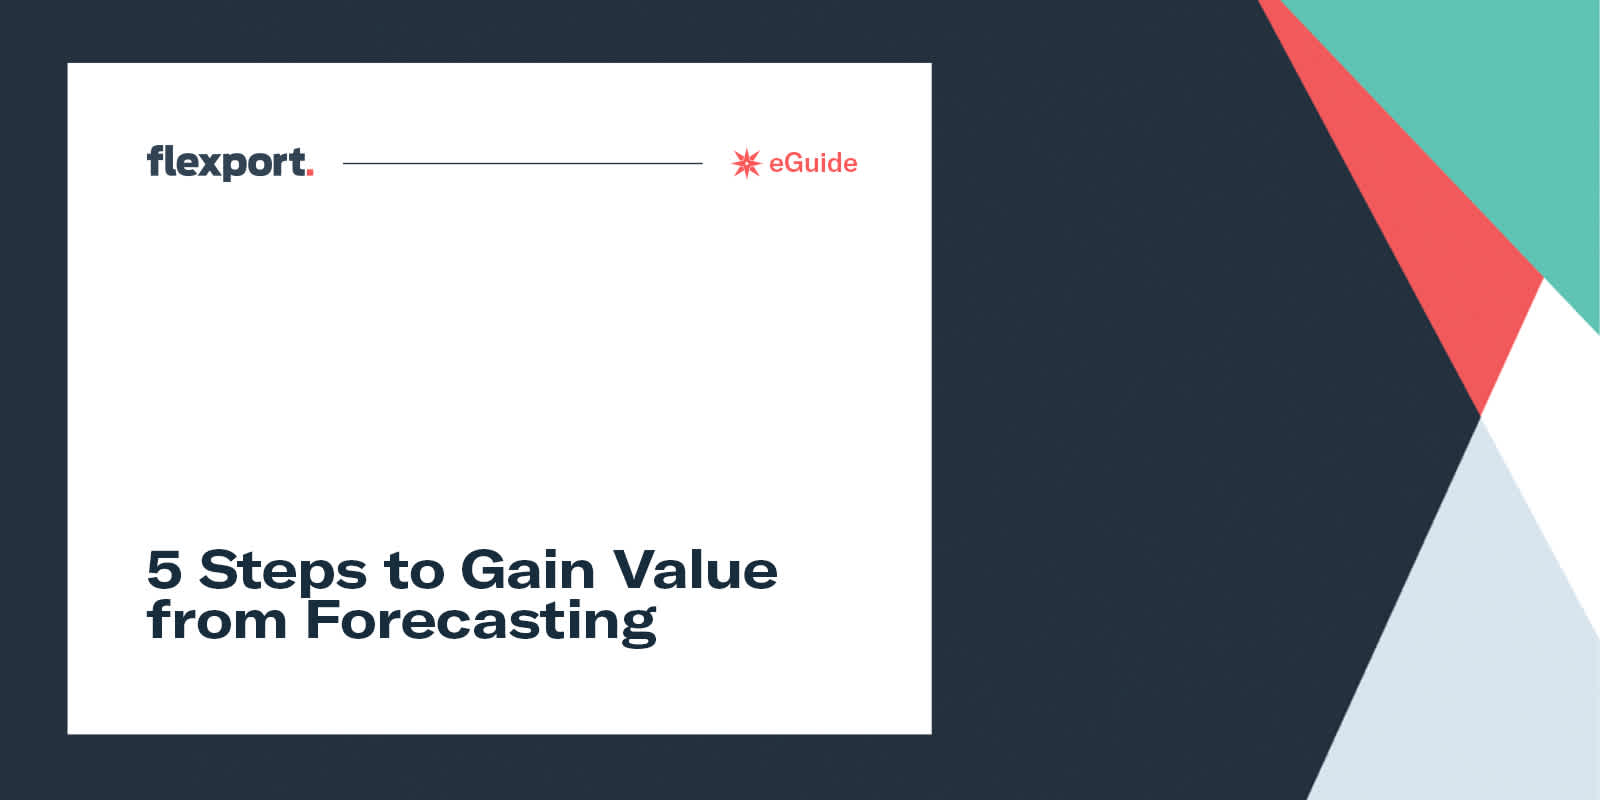 5 Steps to Gain Value from Forecasting